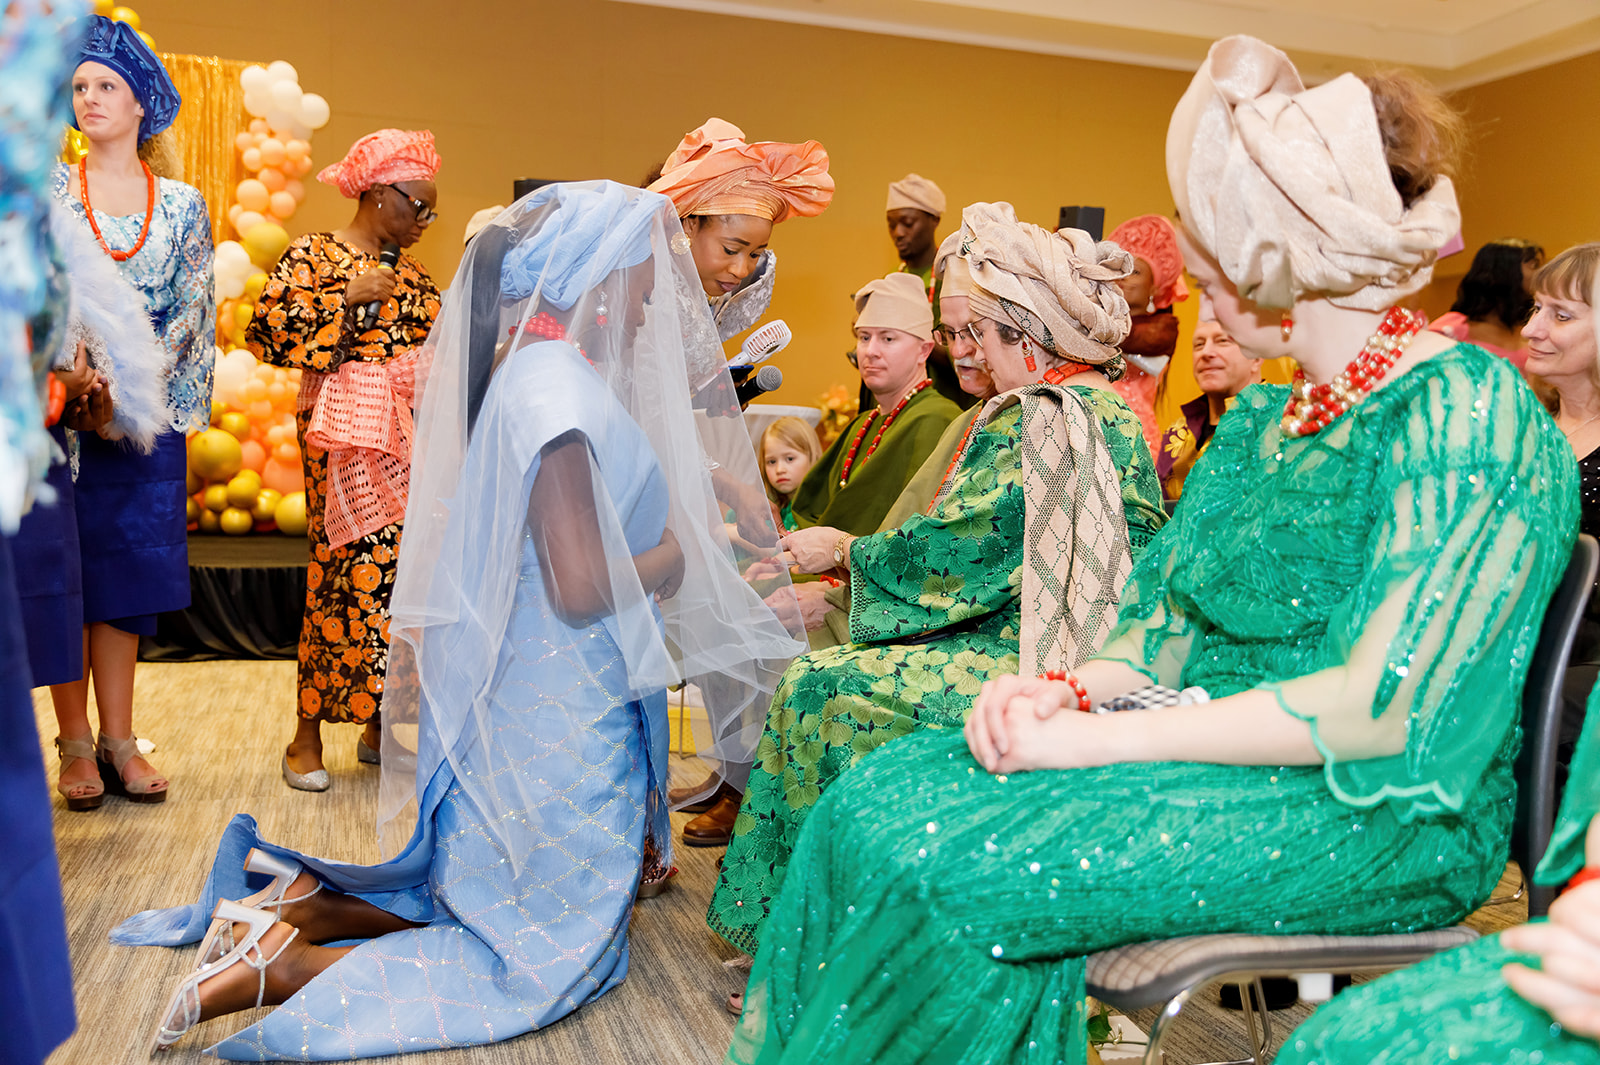 Bride kneels down in front of her family-in-law Nigerian traditional wedding at Truhlsen Campus Events Center at UNMC